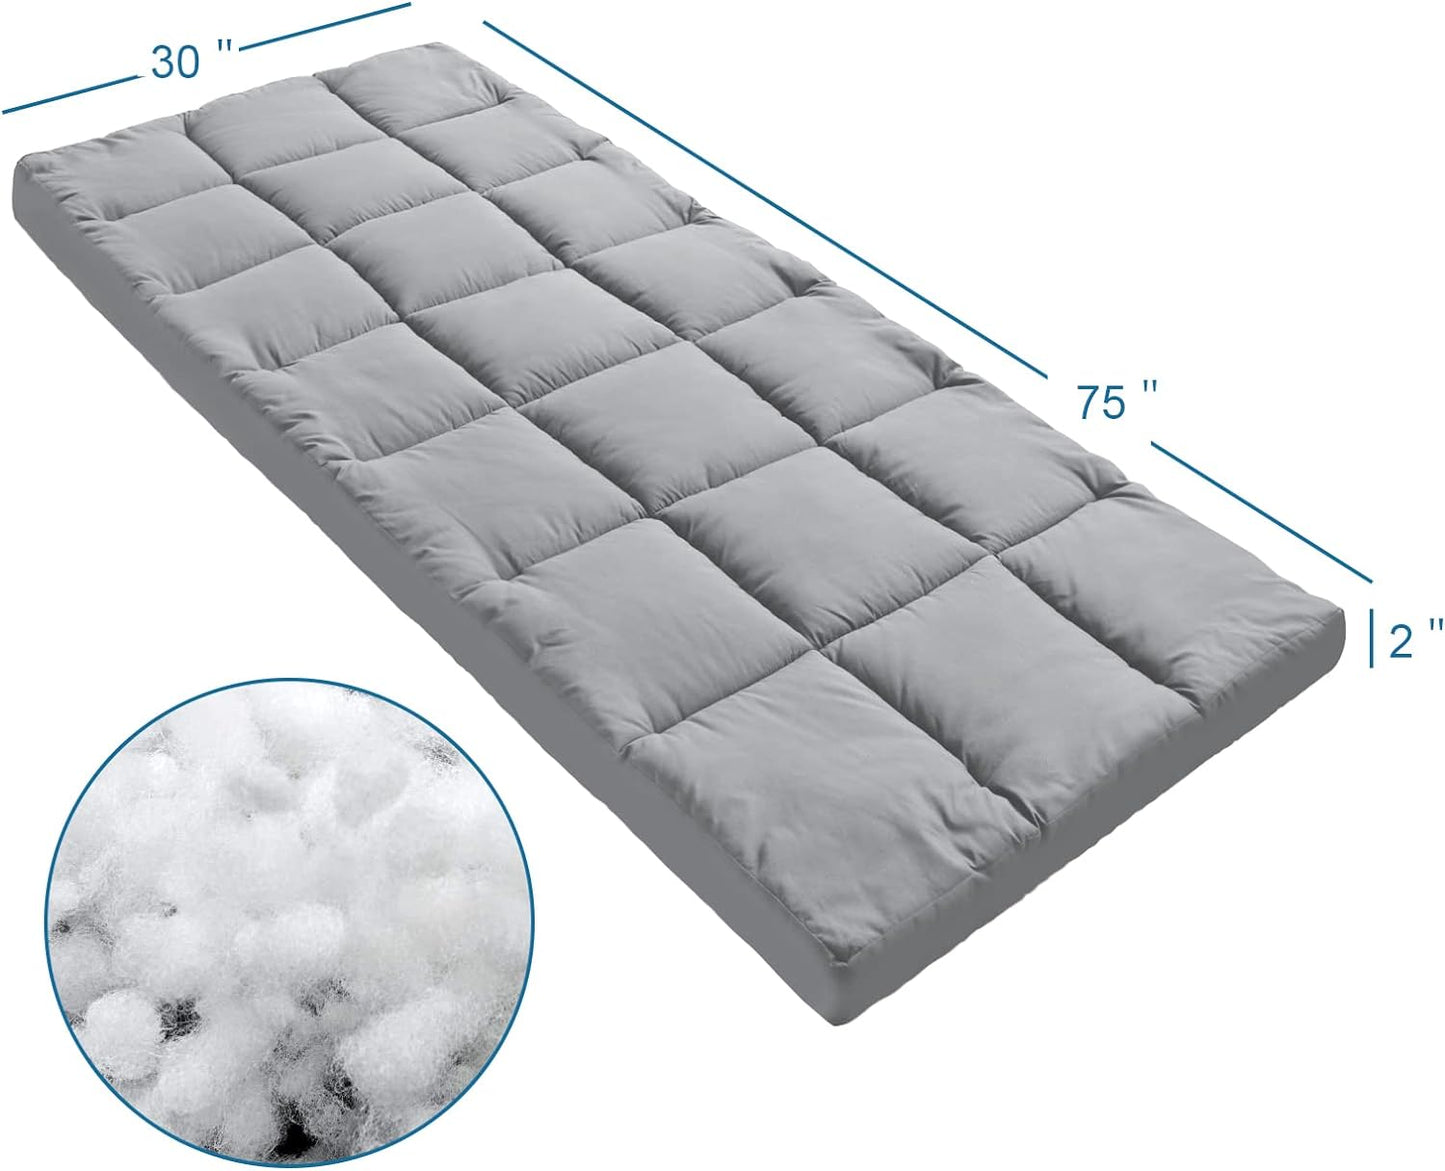 Quilted Cot Mattress Topper - 75" x 30", Soft and Thicker Cot Pad Only, for Camping Cot/Rv Bunk/Narrow Twin Beds, Grey